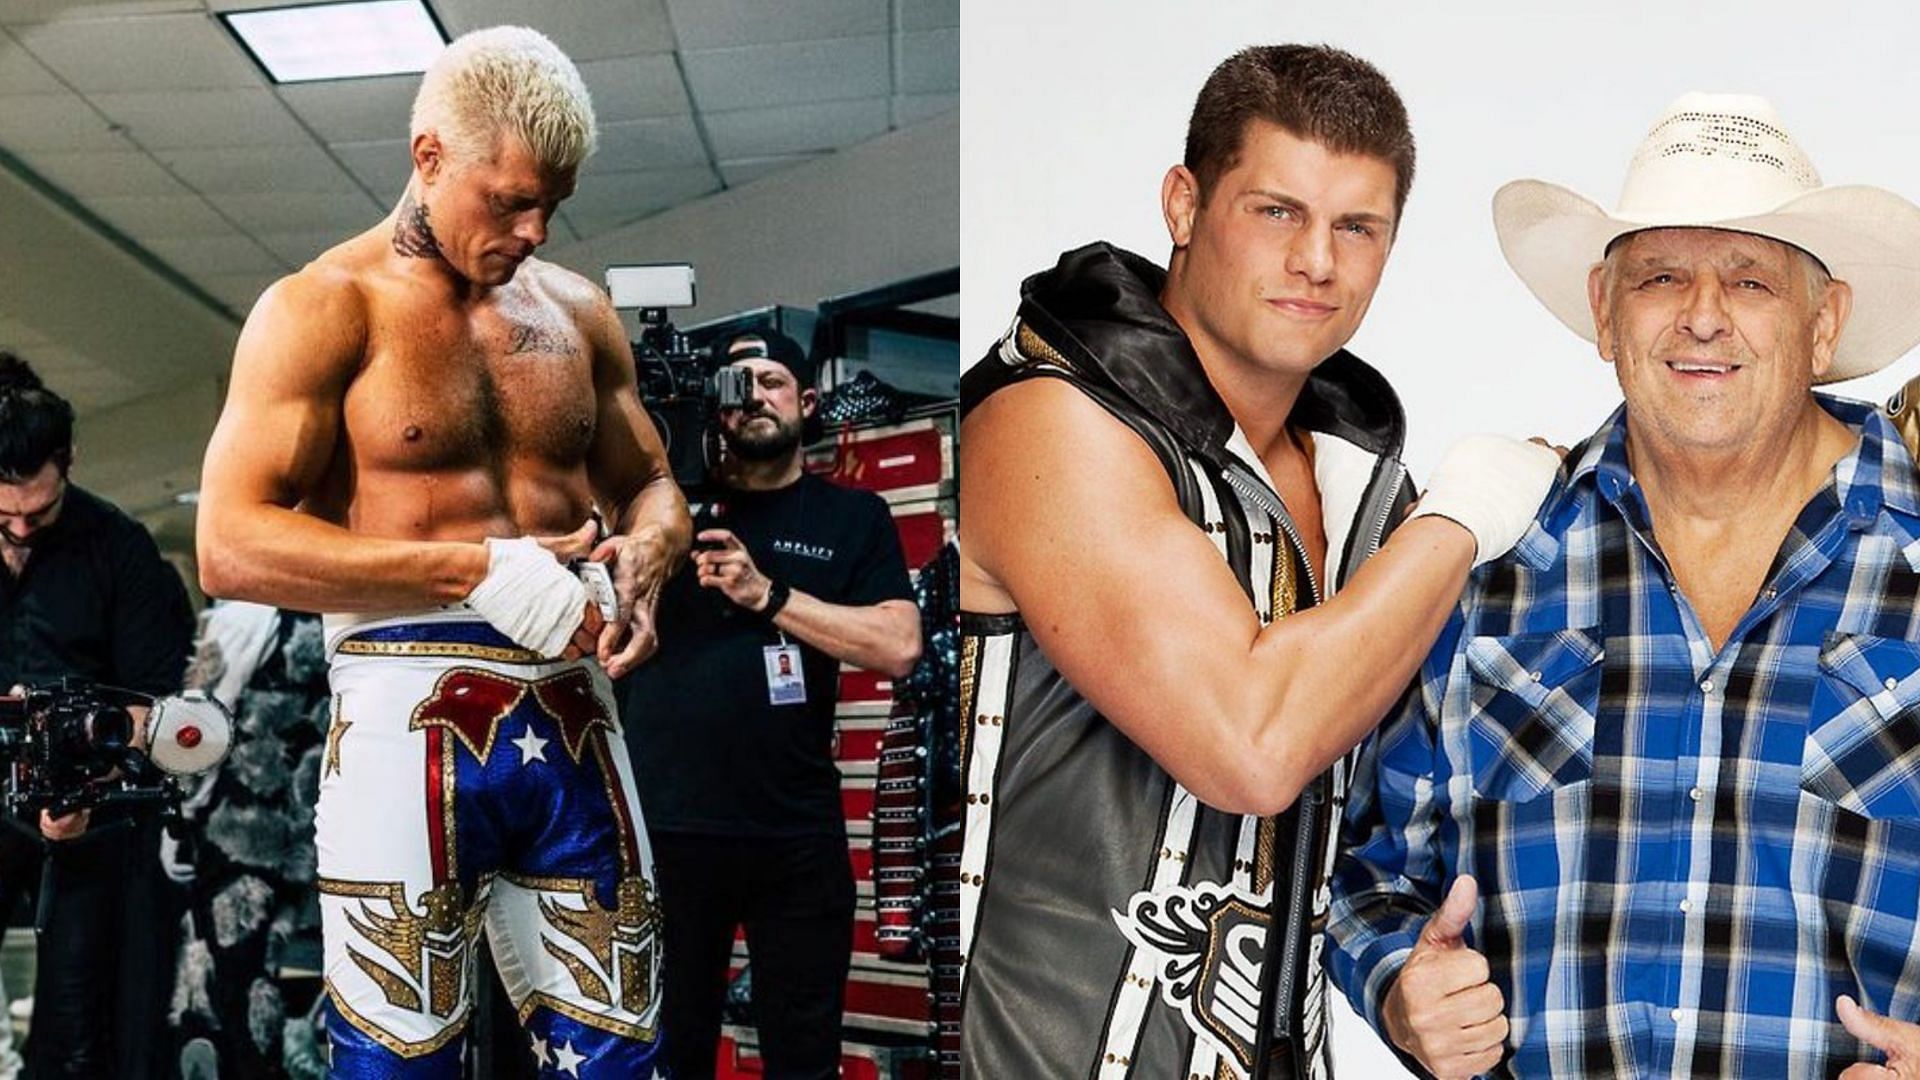 Cody Rhodes with his father, WWE Hall of Famer Dusty Rhodes